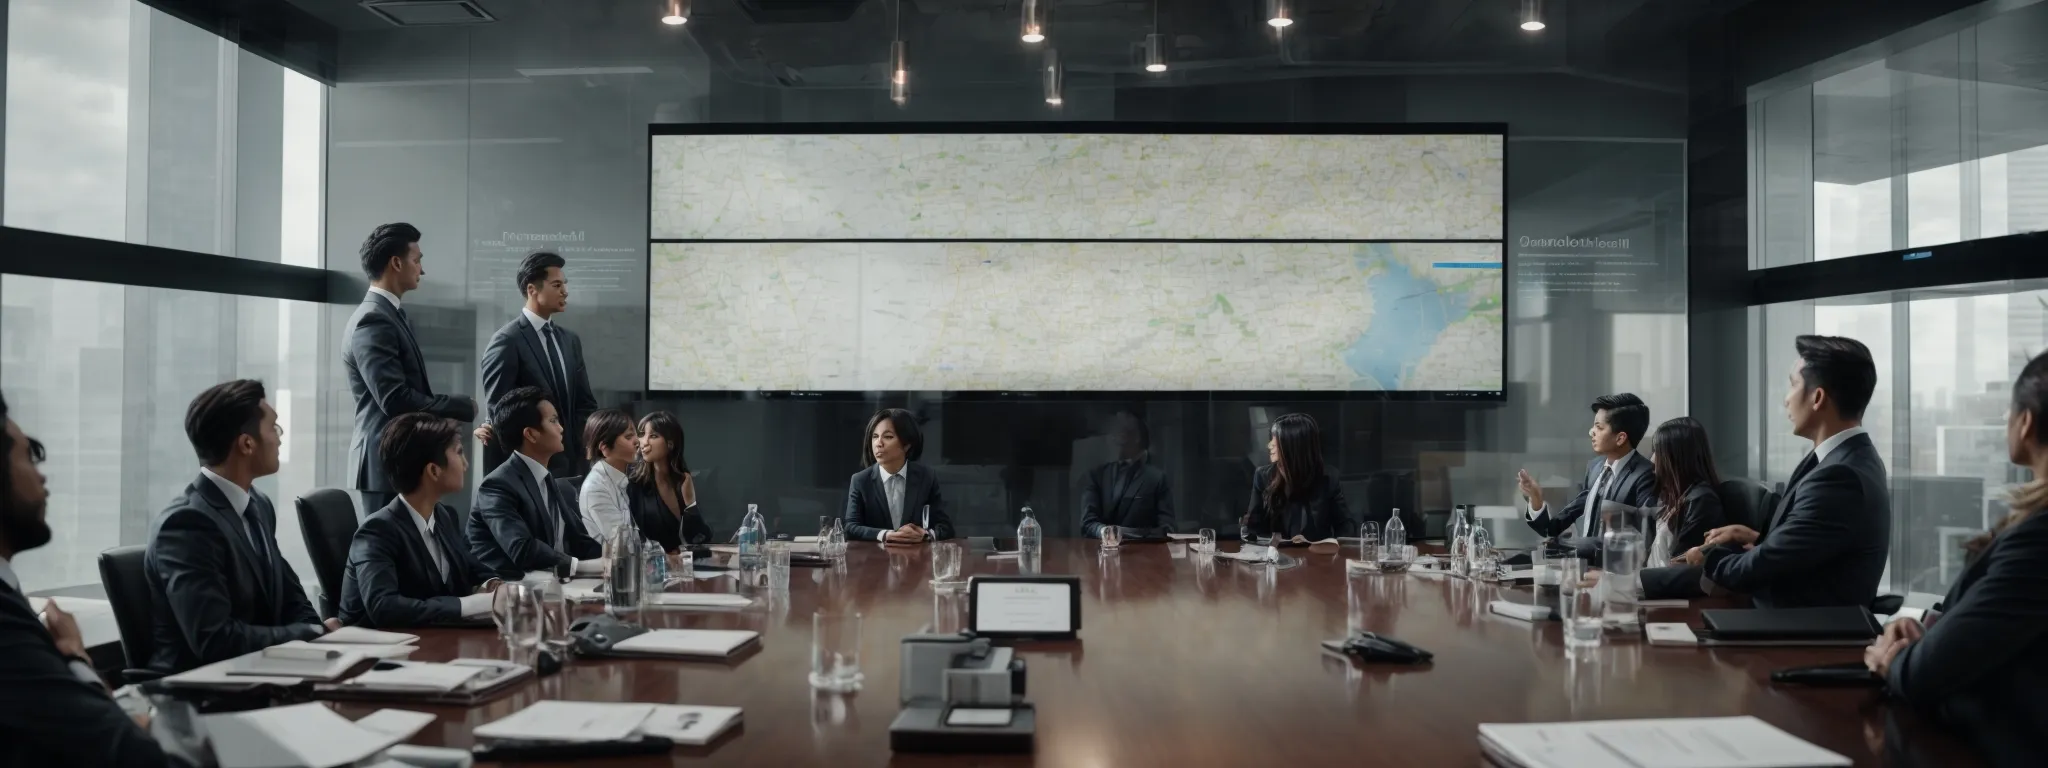 a boardroom meeting with a clear visual presentation on a screen illustrating global seo results.